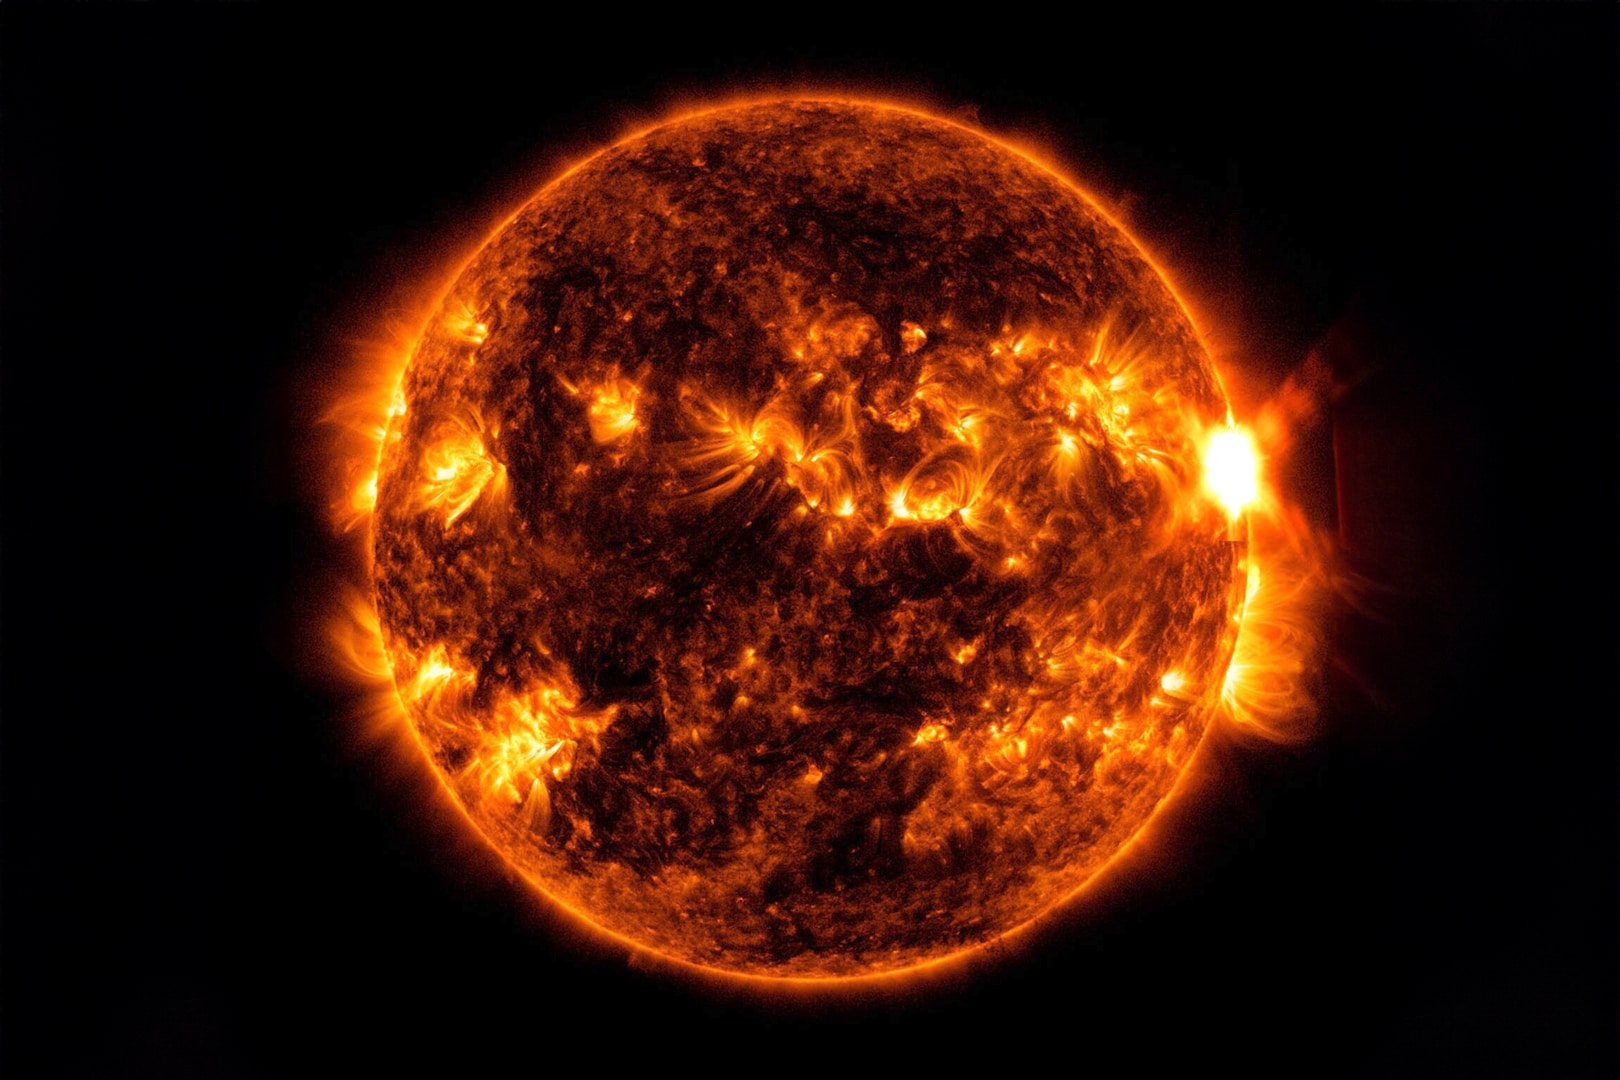 This image, taken on Aug. 5, 2023, shows a blend of extreme ultraviolet light that highlights the intensely hot material in flares and which is colorized in red and orange. (cr: NASA/GSFC/SDO)